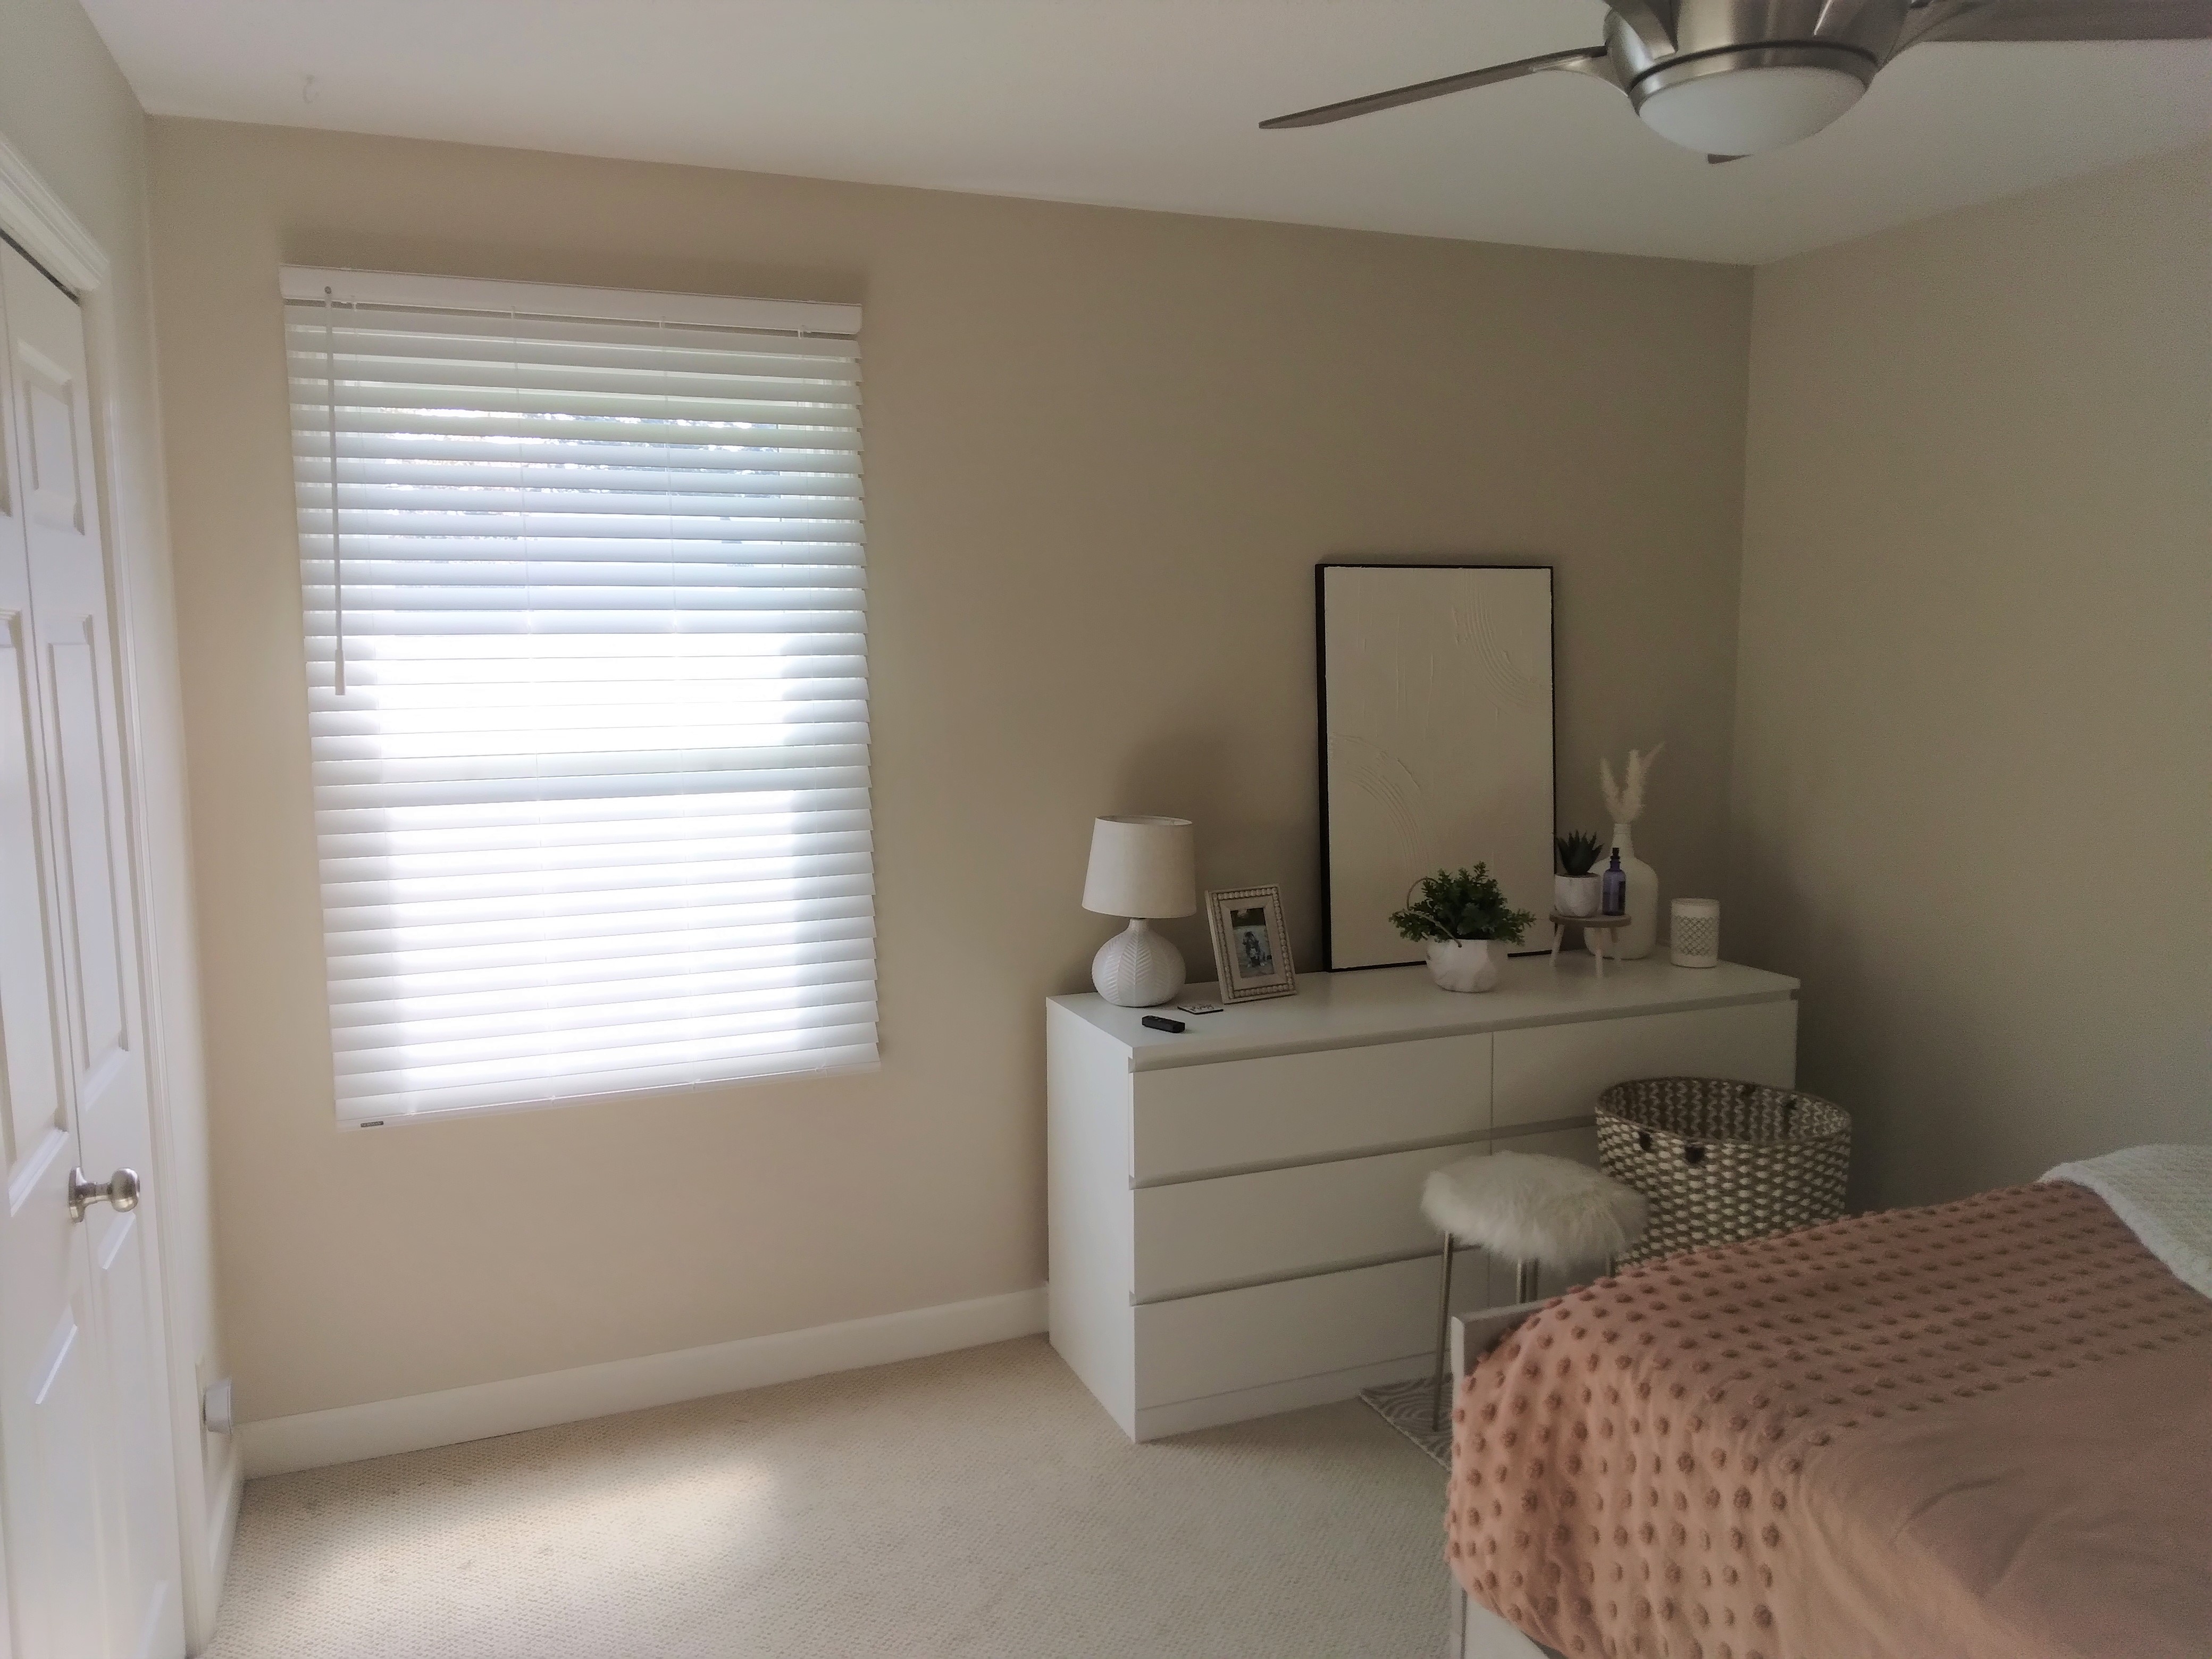 These white faux wood blinds look great in this Springfield Illinois bedroom.  BudgetBlinds  WindowCoverings  Blinds  SpringfieldIllinois